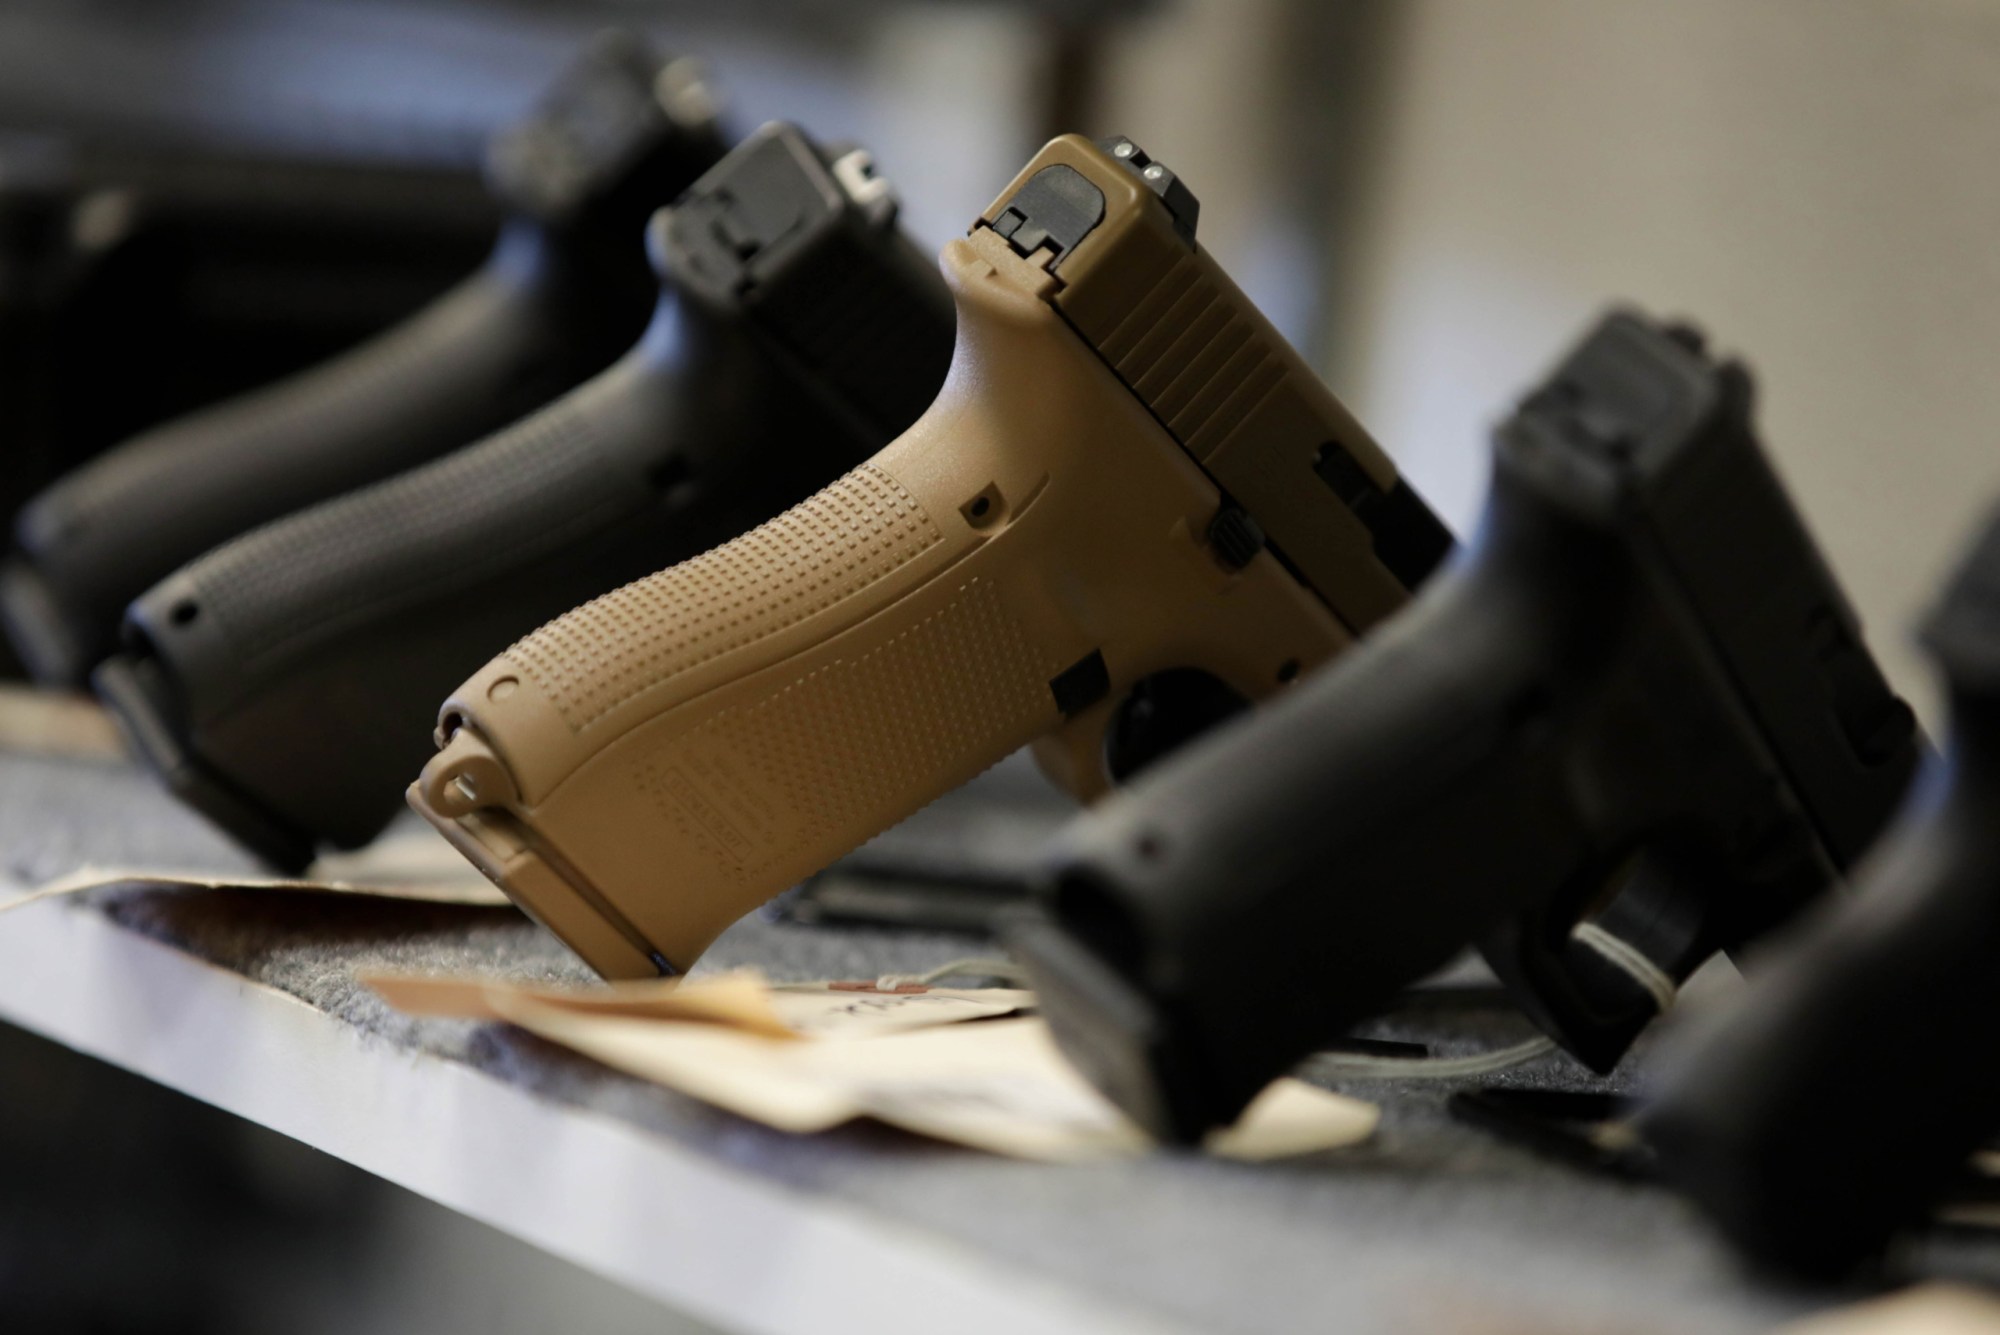 Weapons are on display at a gun shop in Manassas, Virginia, following an increase in gun and ammunition sales amid the COVID-19 pandemic, March 2020. (Getty/Anadolu Agency/Yasin Ozturk)